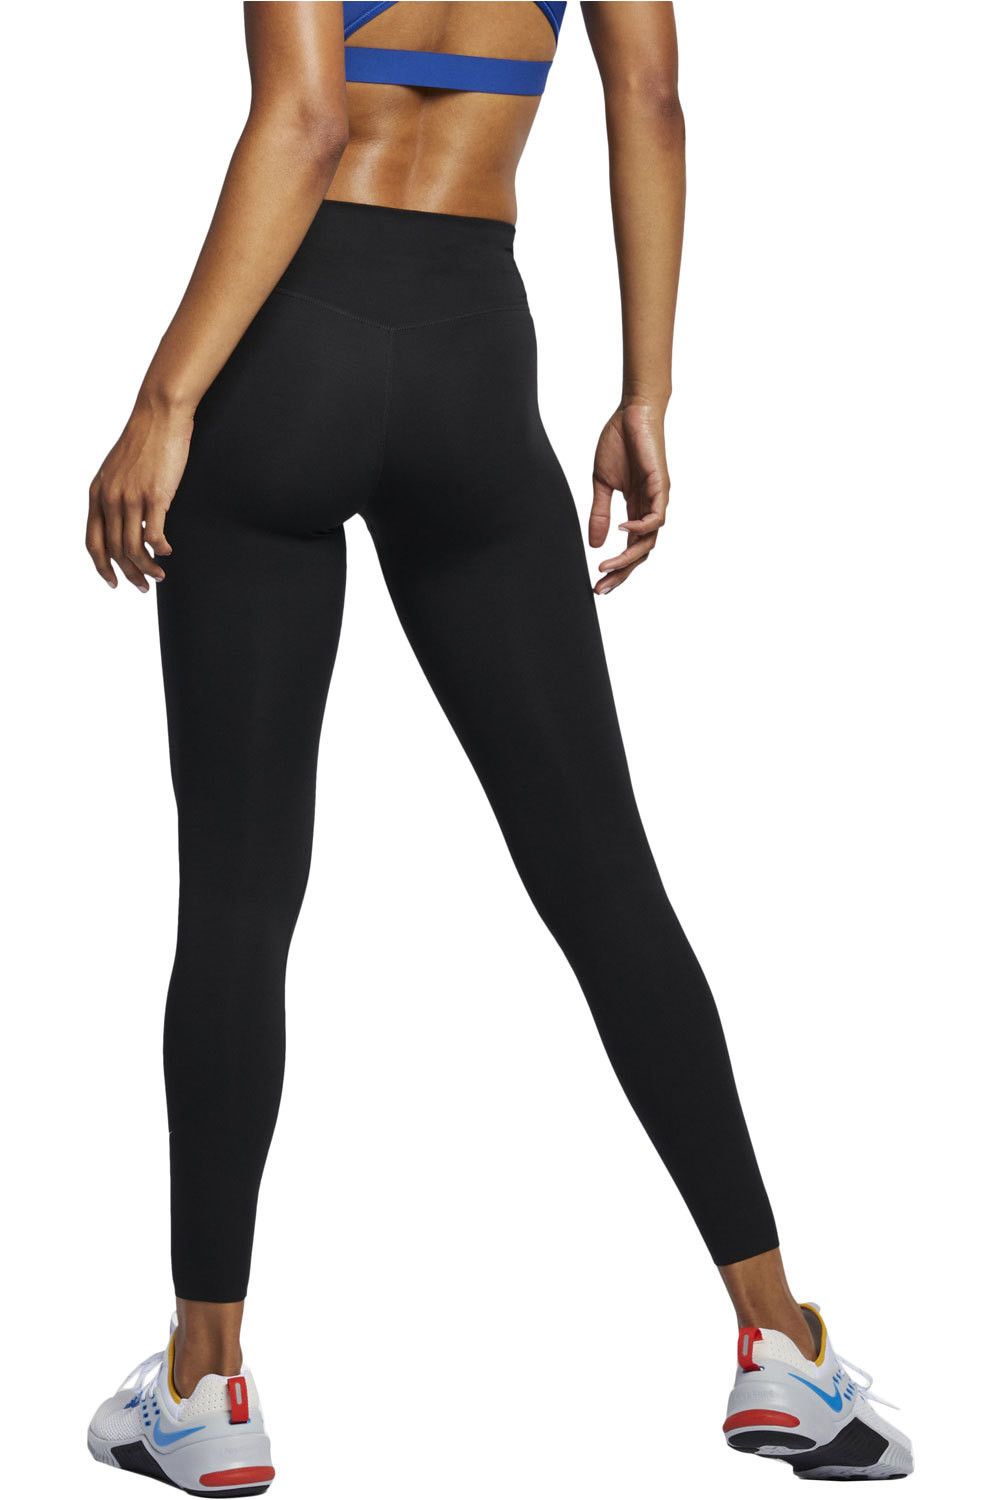 Nike pantalones y mallas largas fitness mujer W ONE LUXE MR TIGHT vista trasera